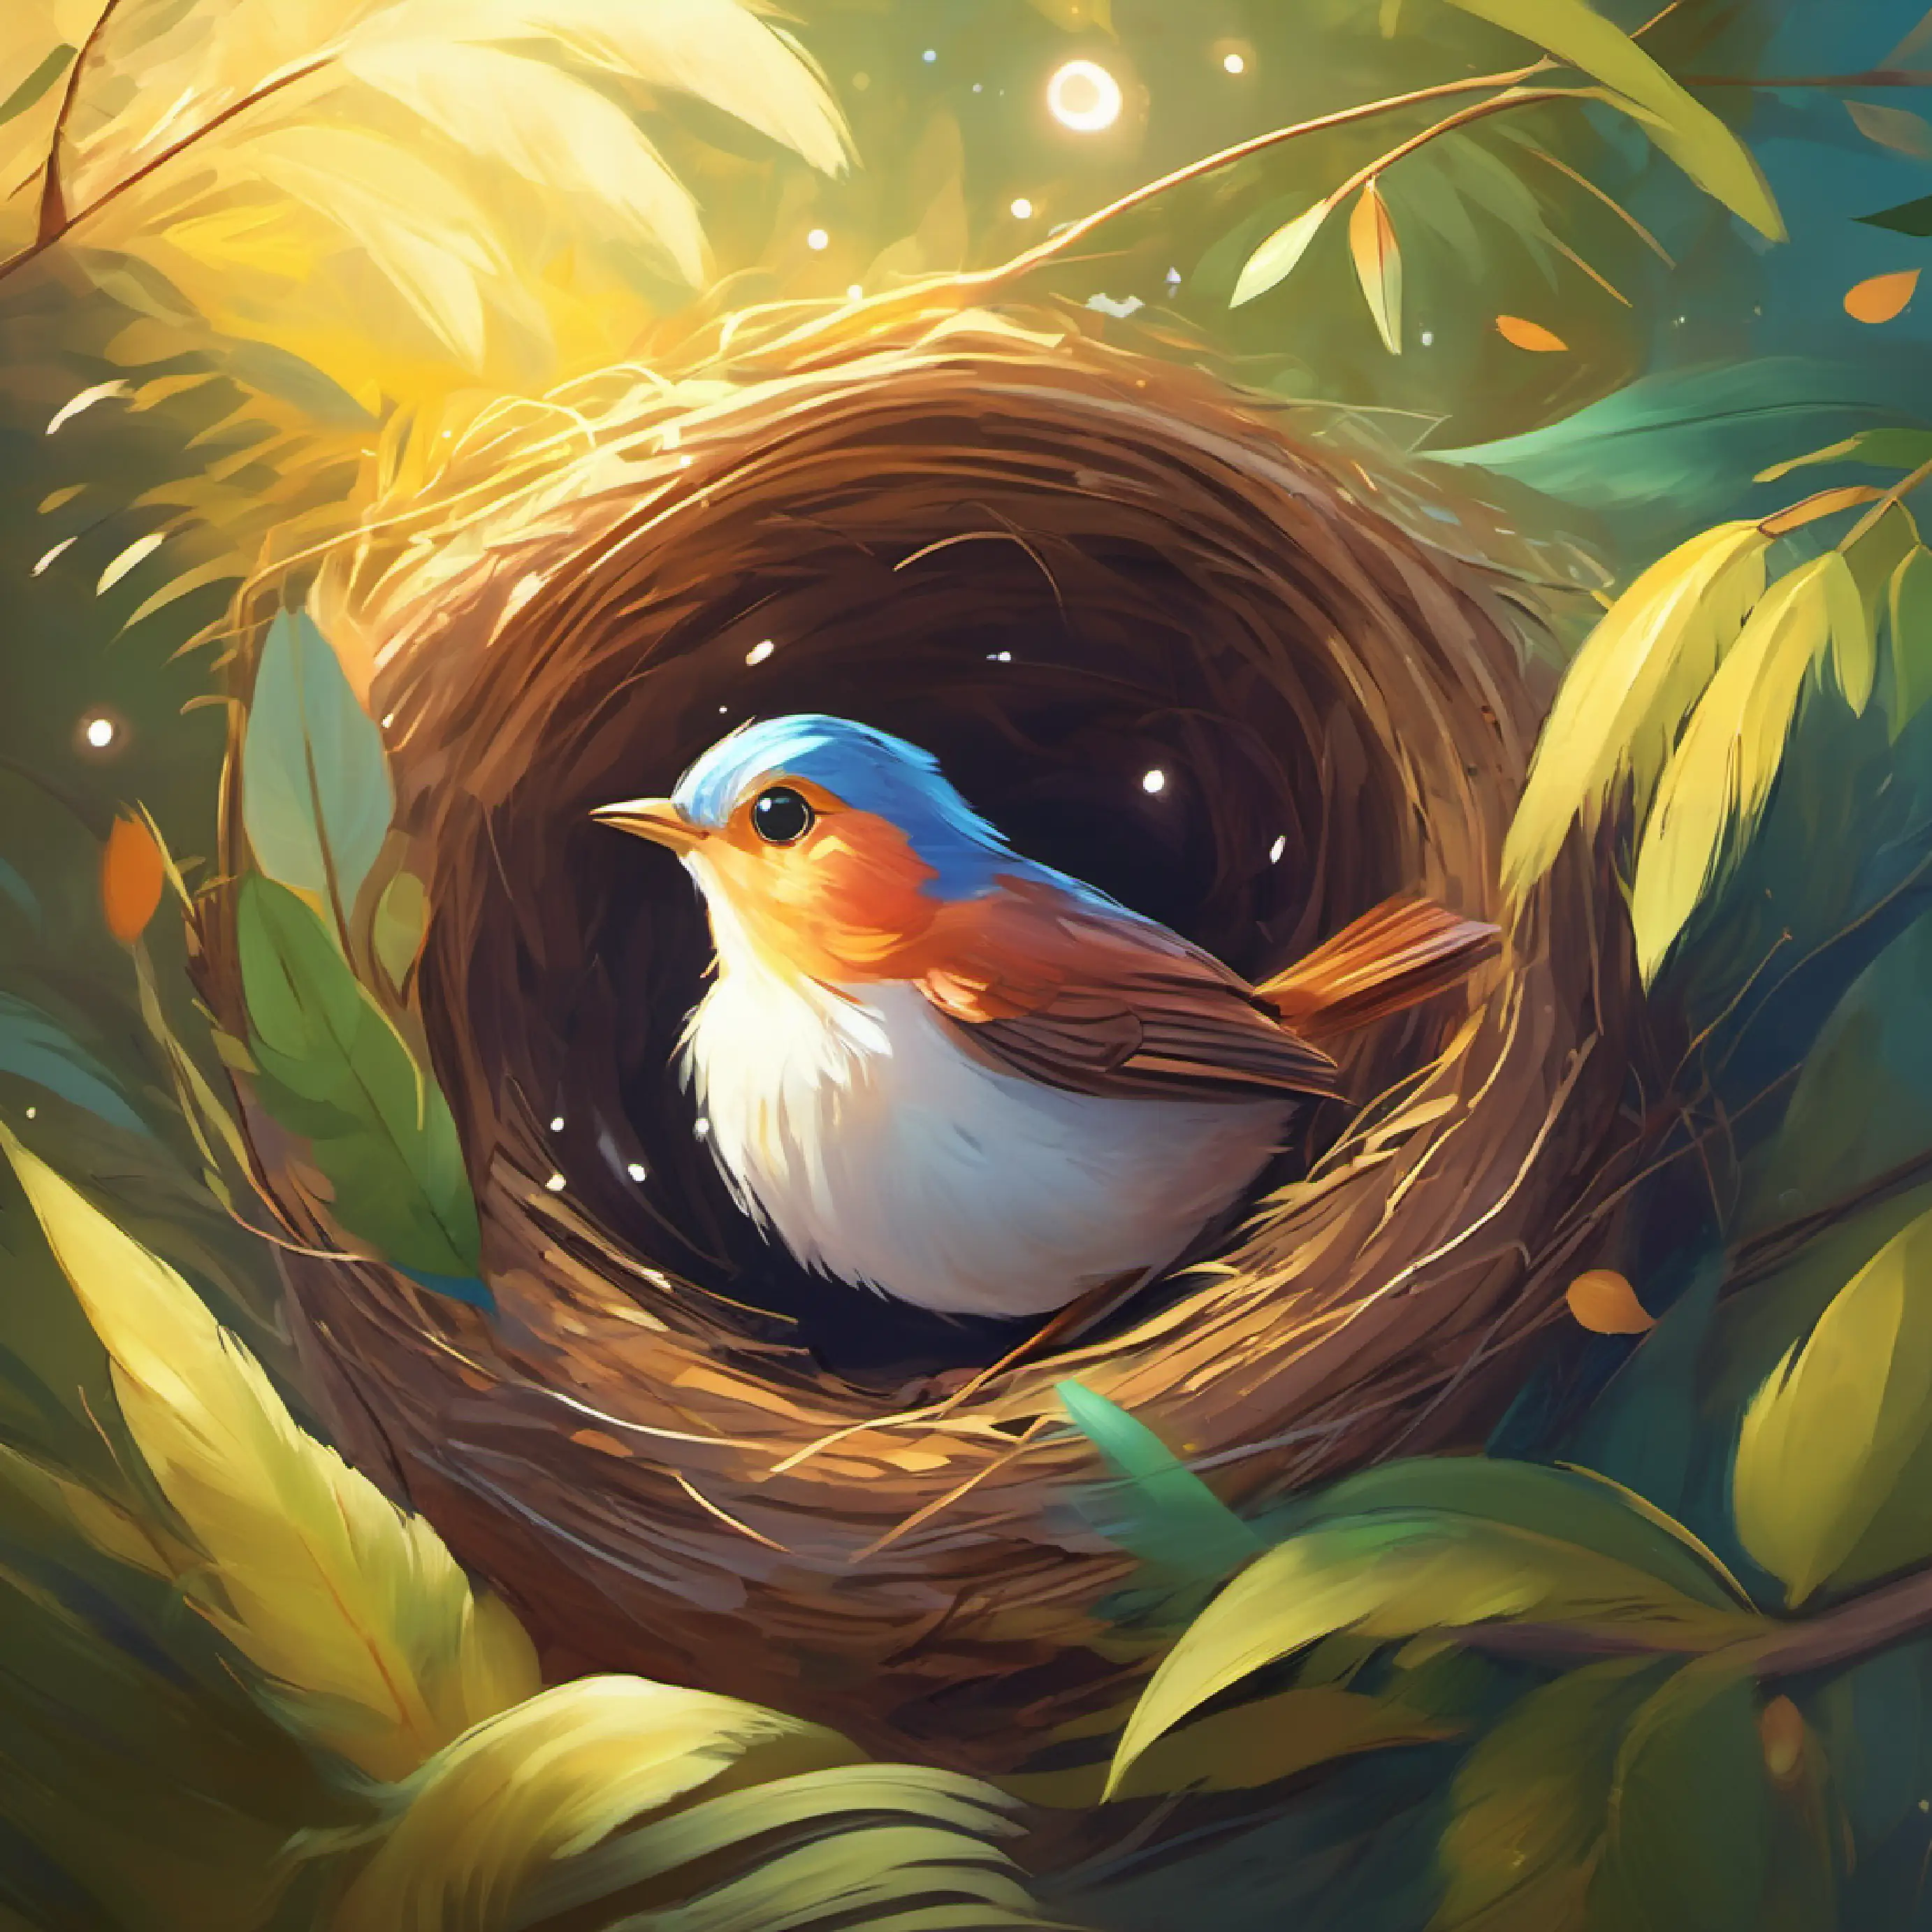 Small, joyful bird with bright feathers and sparkling eyes wakes up in her nest, eager to start her day.